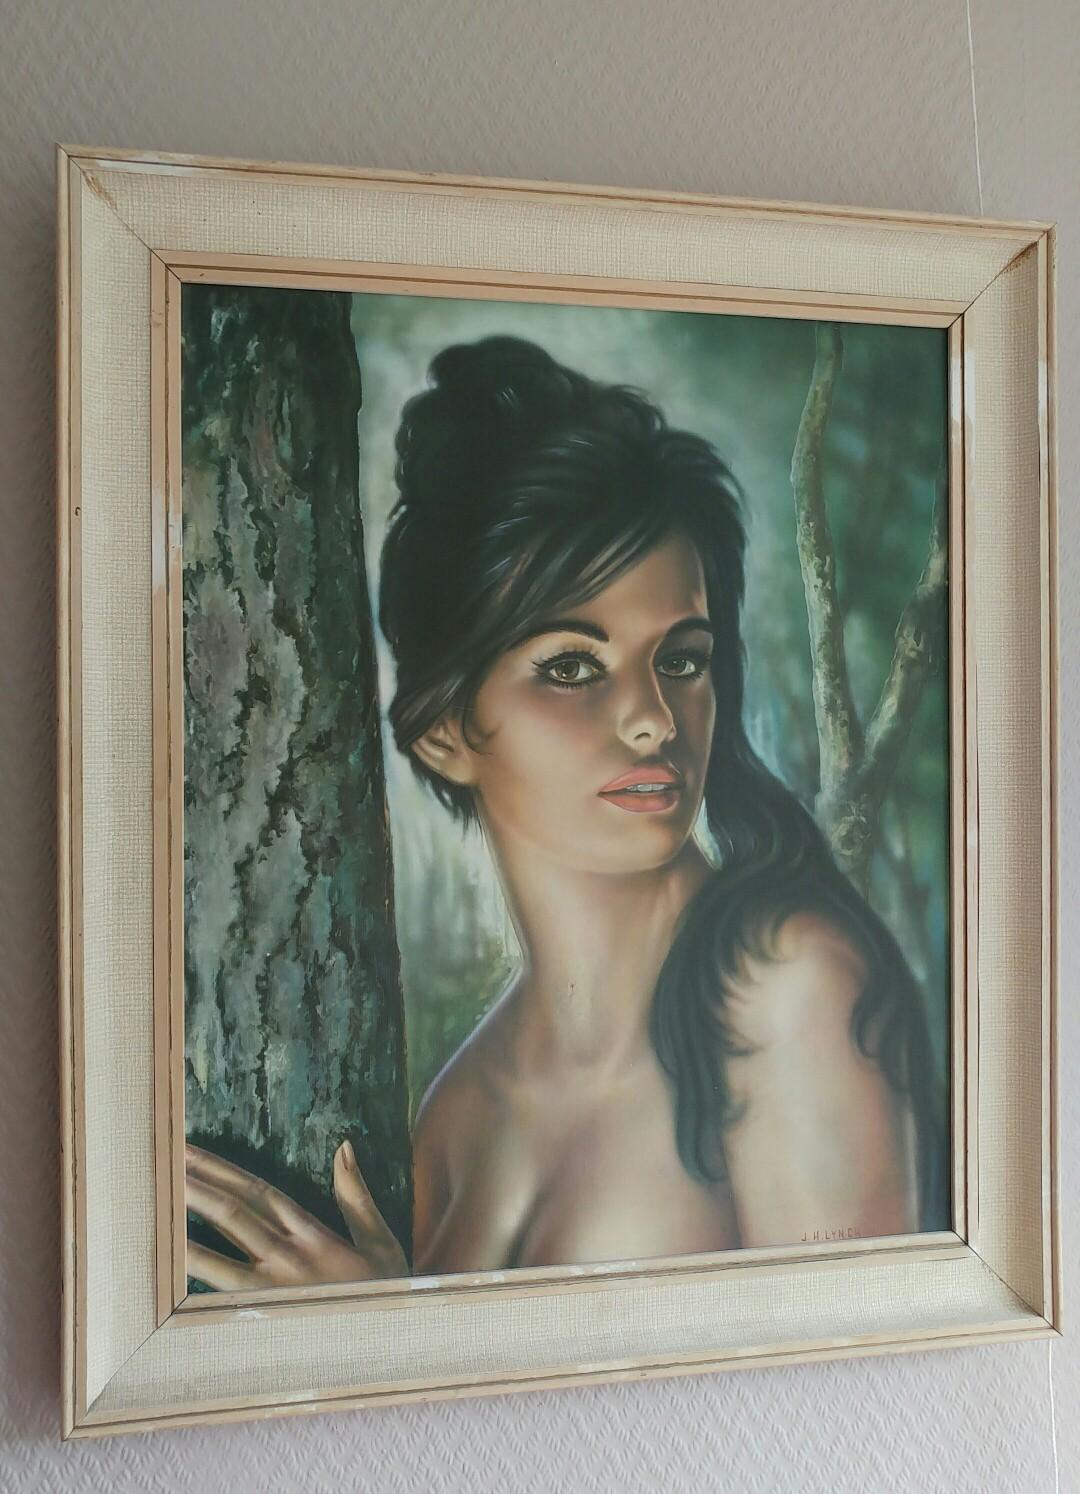 Vintage Tina JH Lynch print, Tretchikoff era in WF1 Wakefield for £30. ...